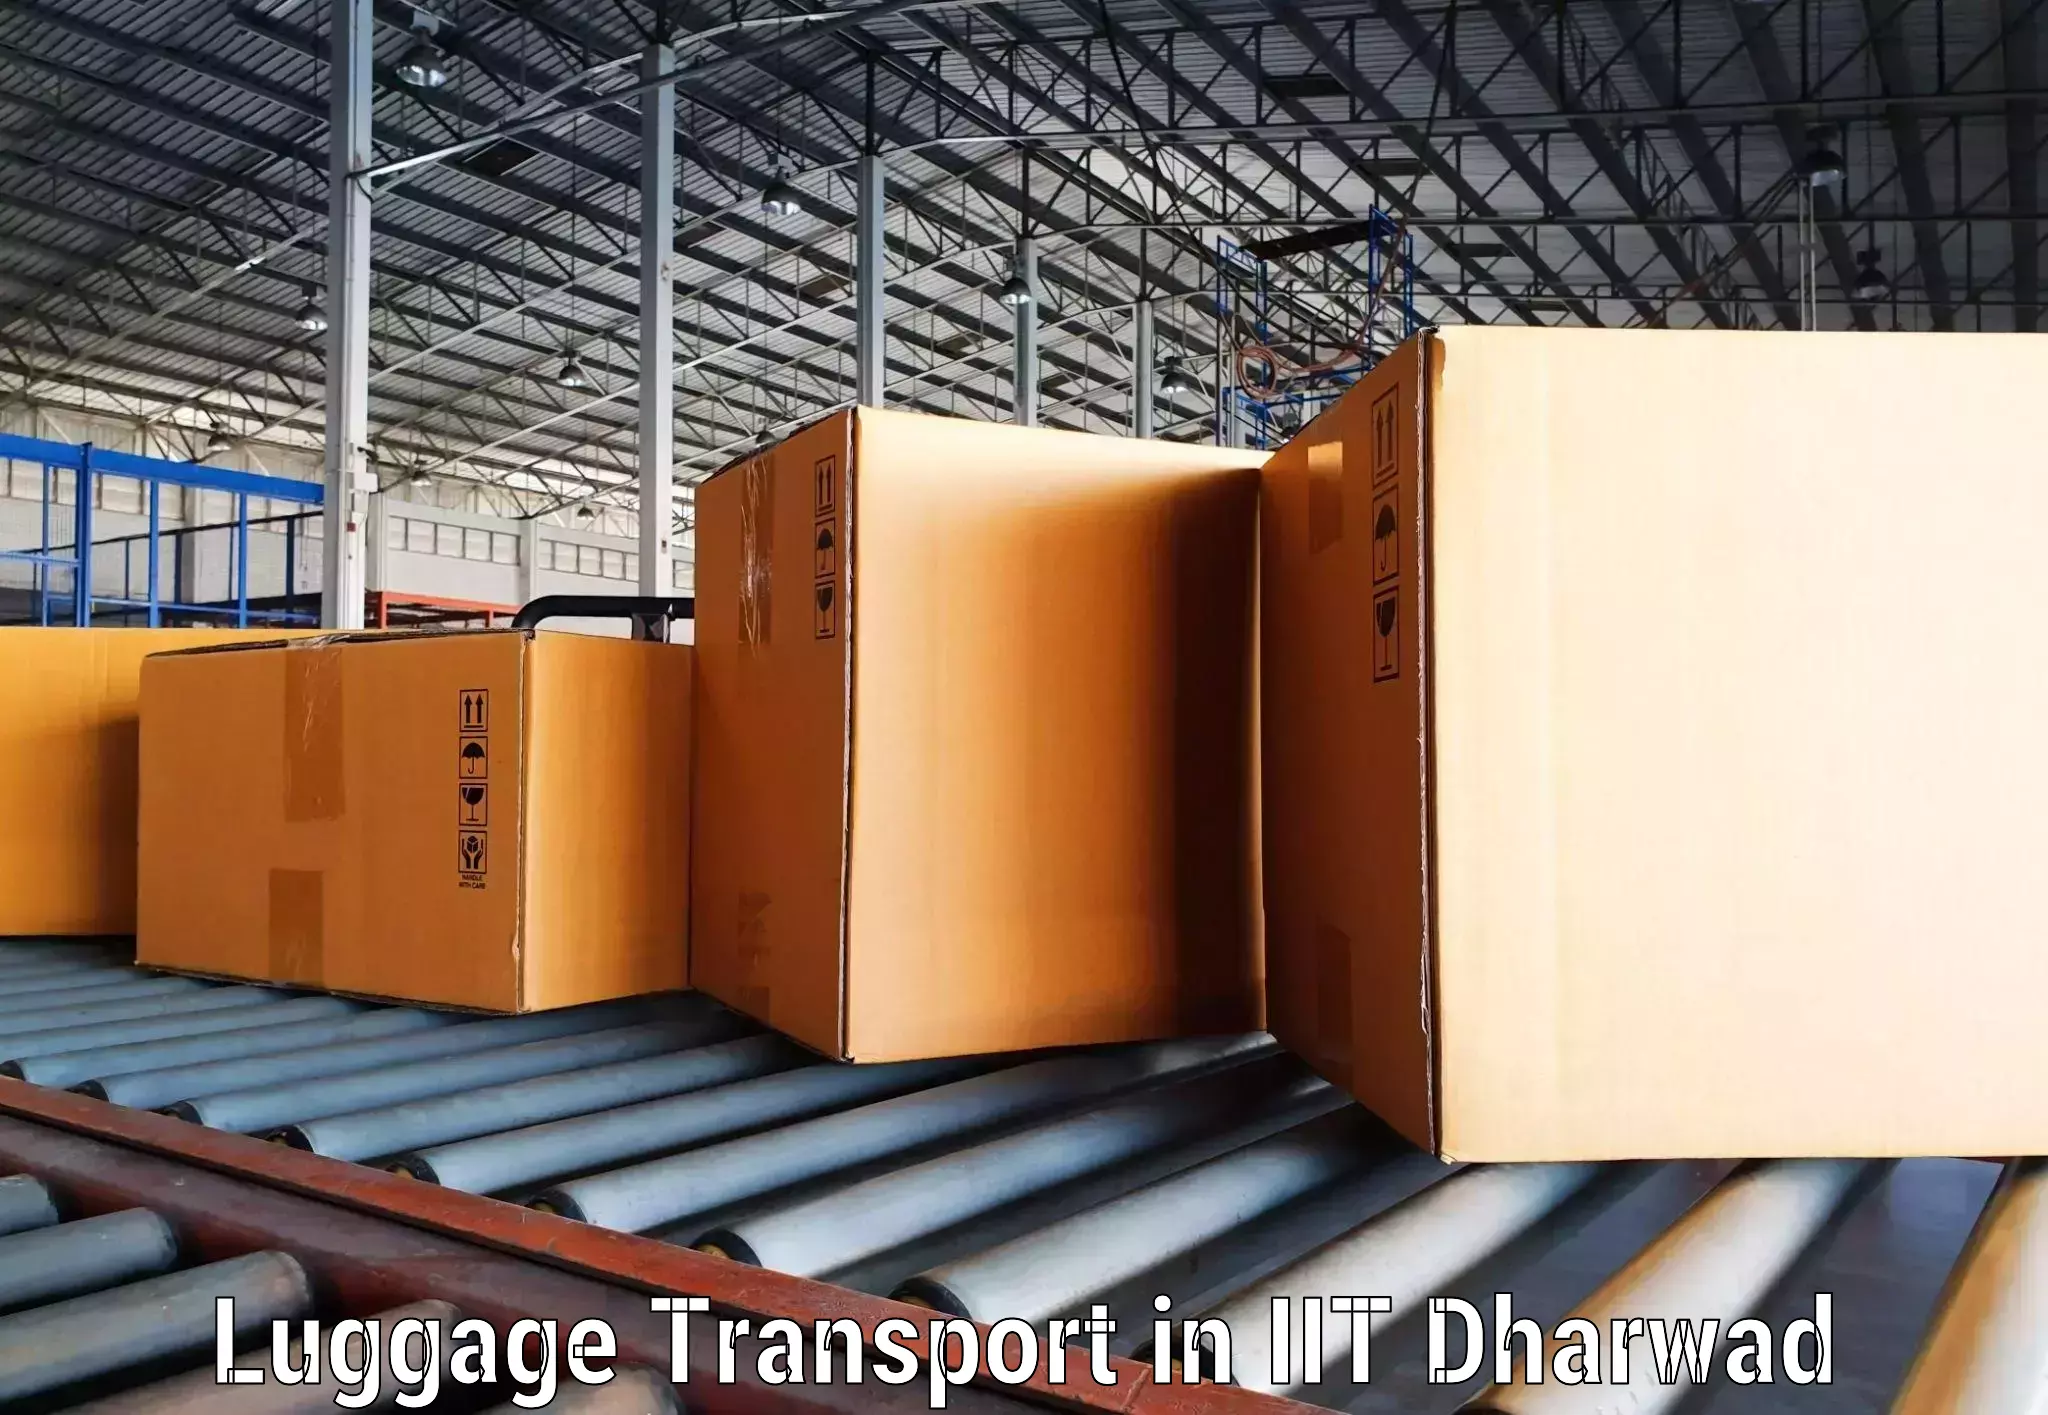 Baggage transport management in IIT Dharwad